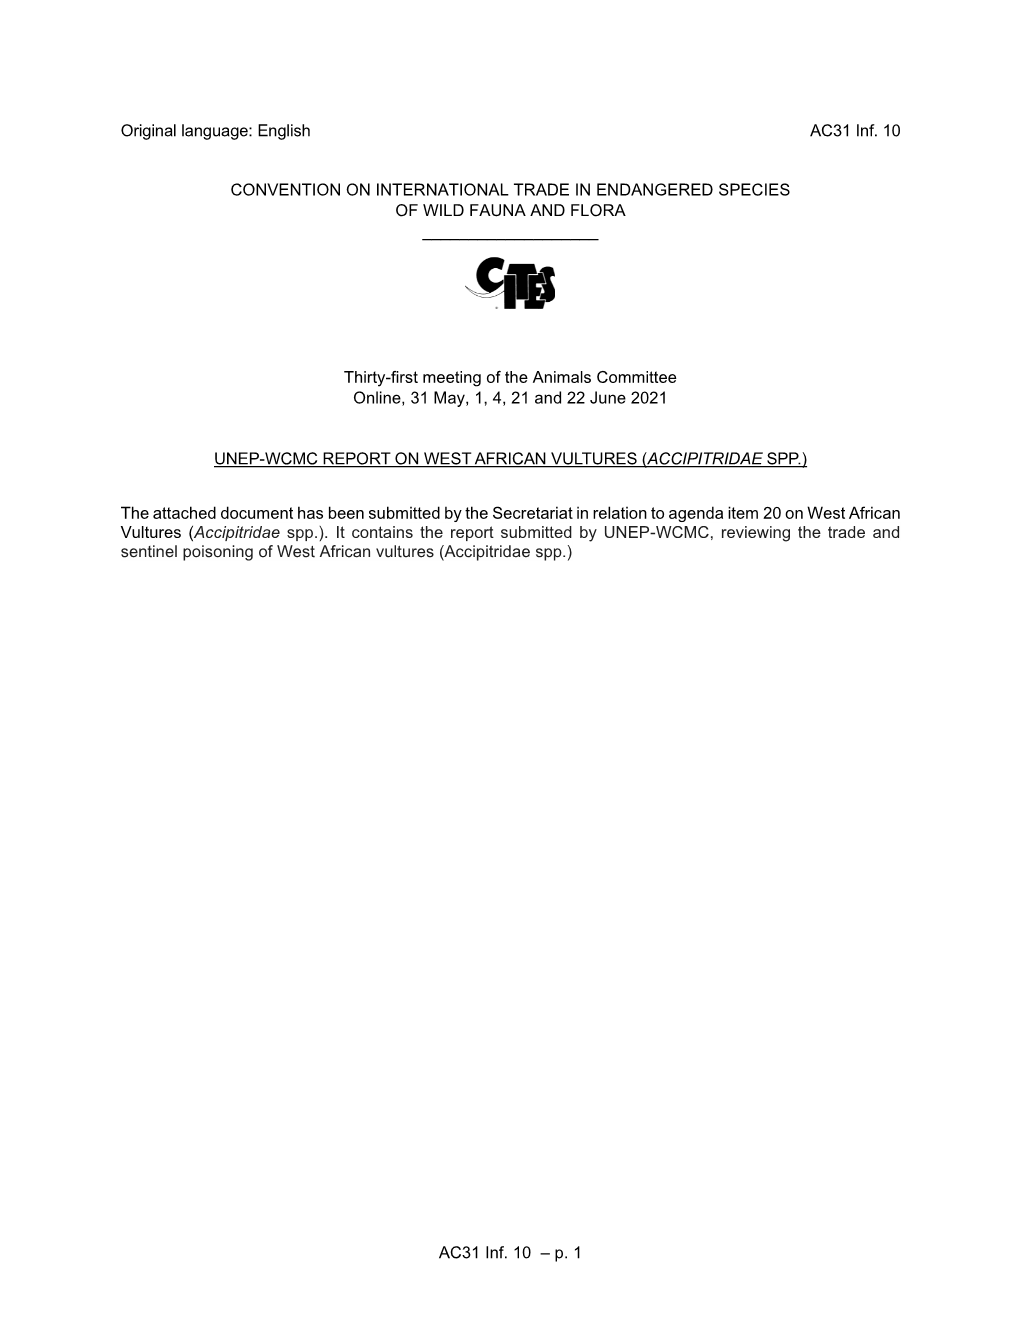 English AC31 Inf. 10 CONVENTION on INTERNATIONAL TRADE in ENDANGERED SPECIES of WILD F